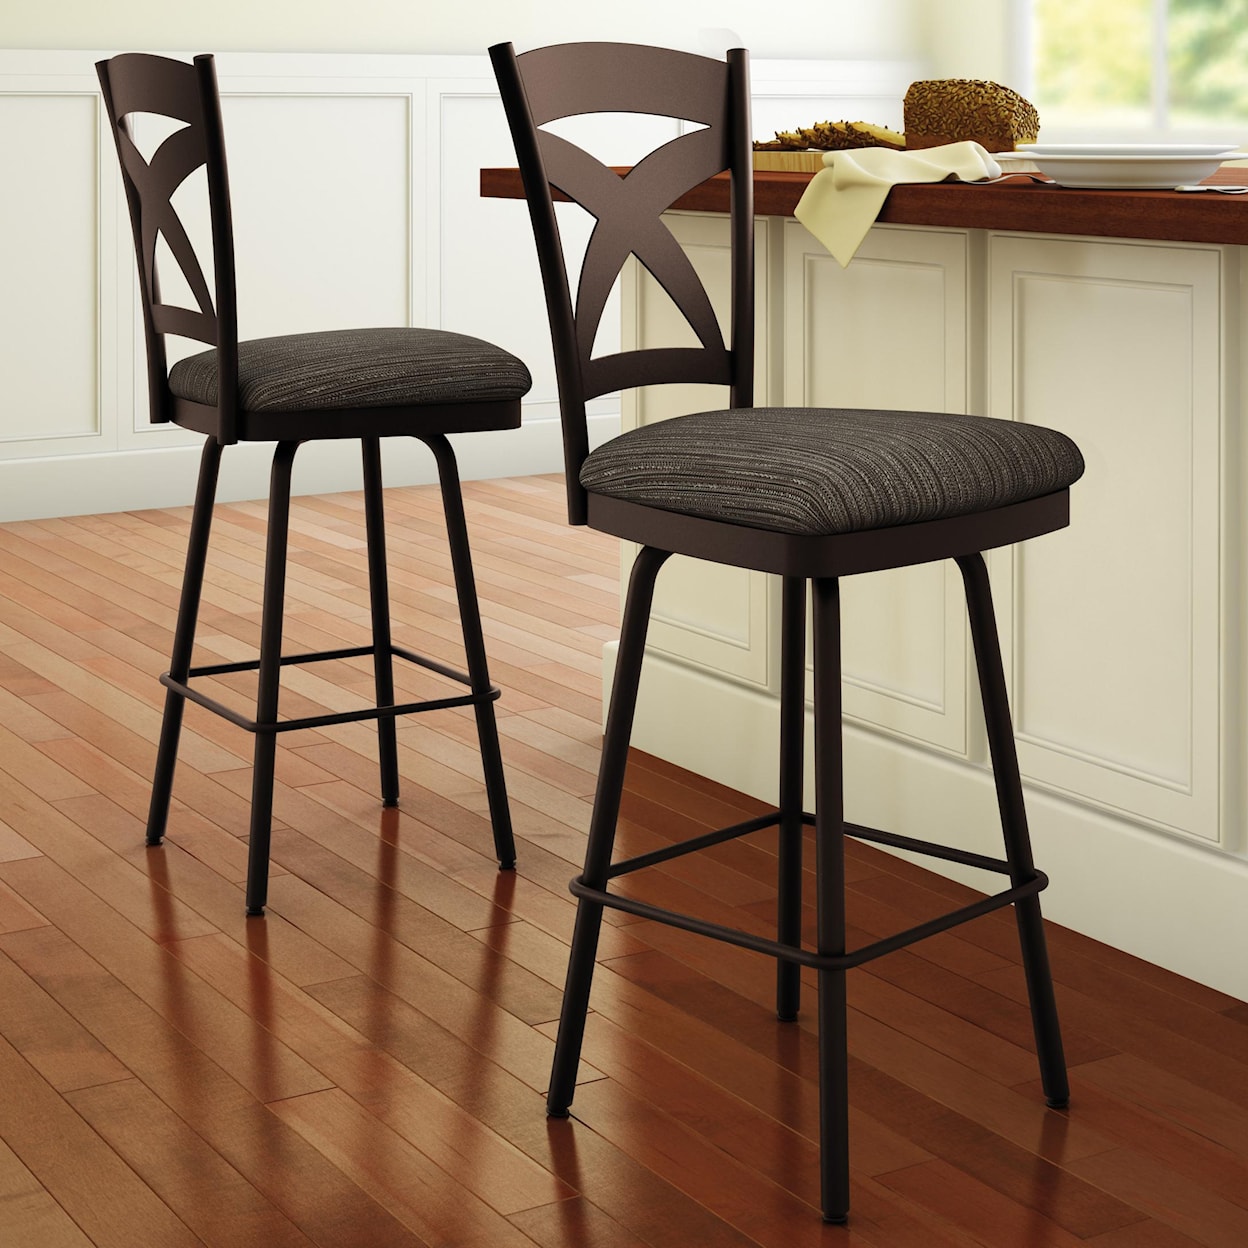 Amisco Countryside 34" Spectator Height Marcus Stool